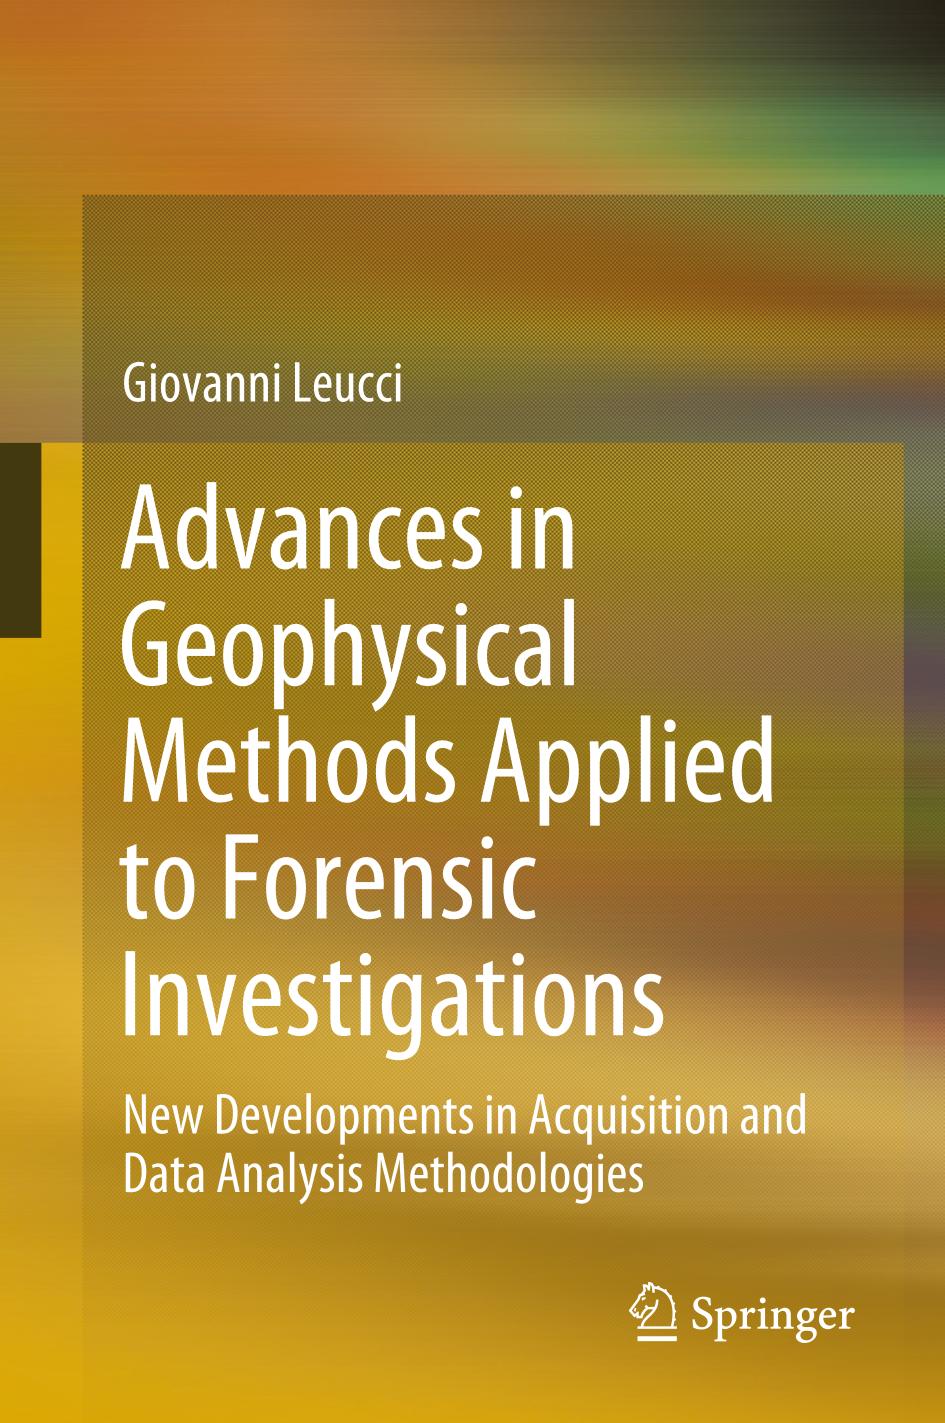 Advances in Geophysical Methods Applied to Forensic Investigations : New Developments in Acquisition and Data Analysis Methodologies